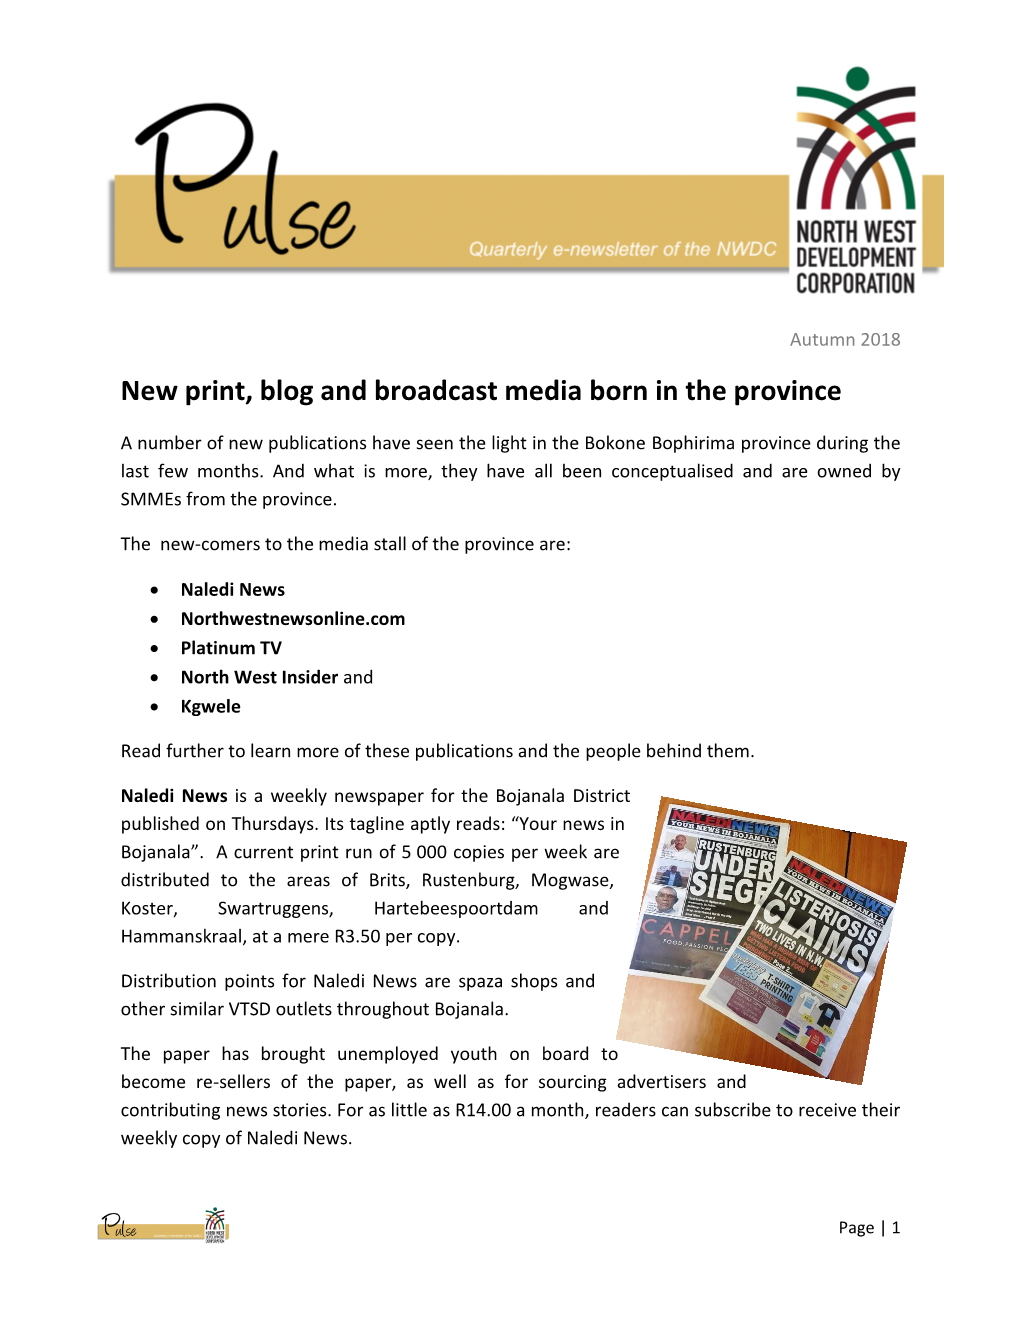 New Print, Blog and Broadcast Media Born in the Province